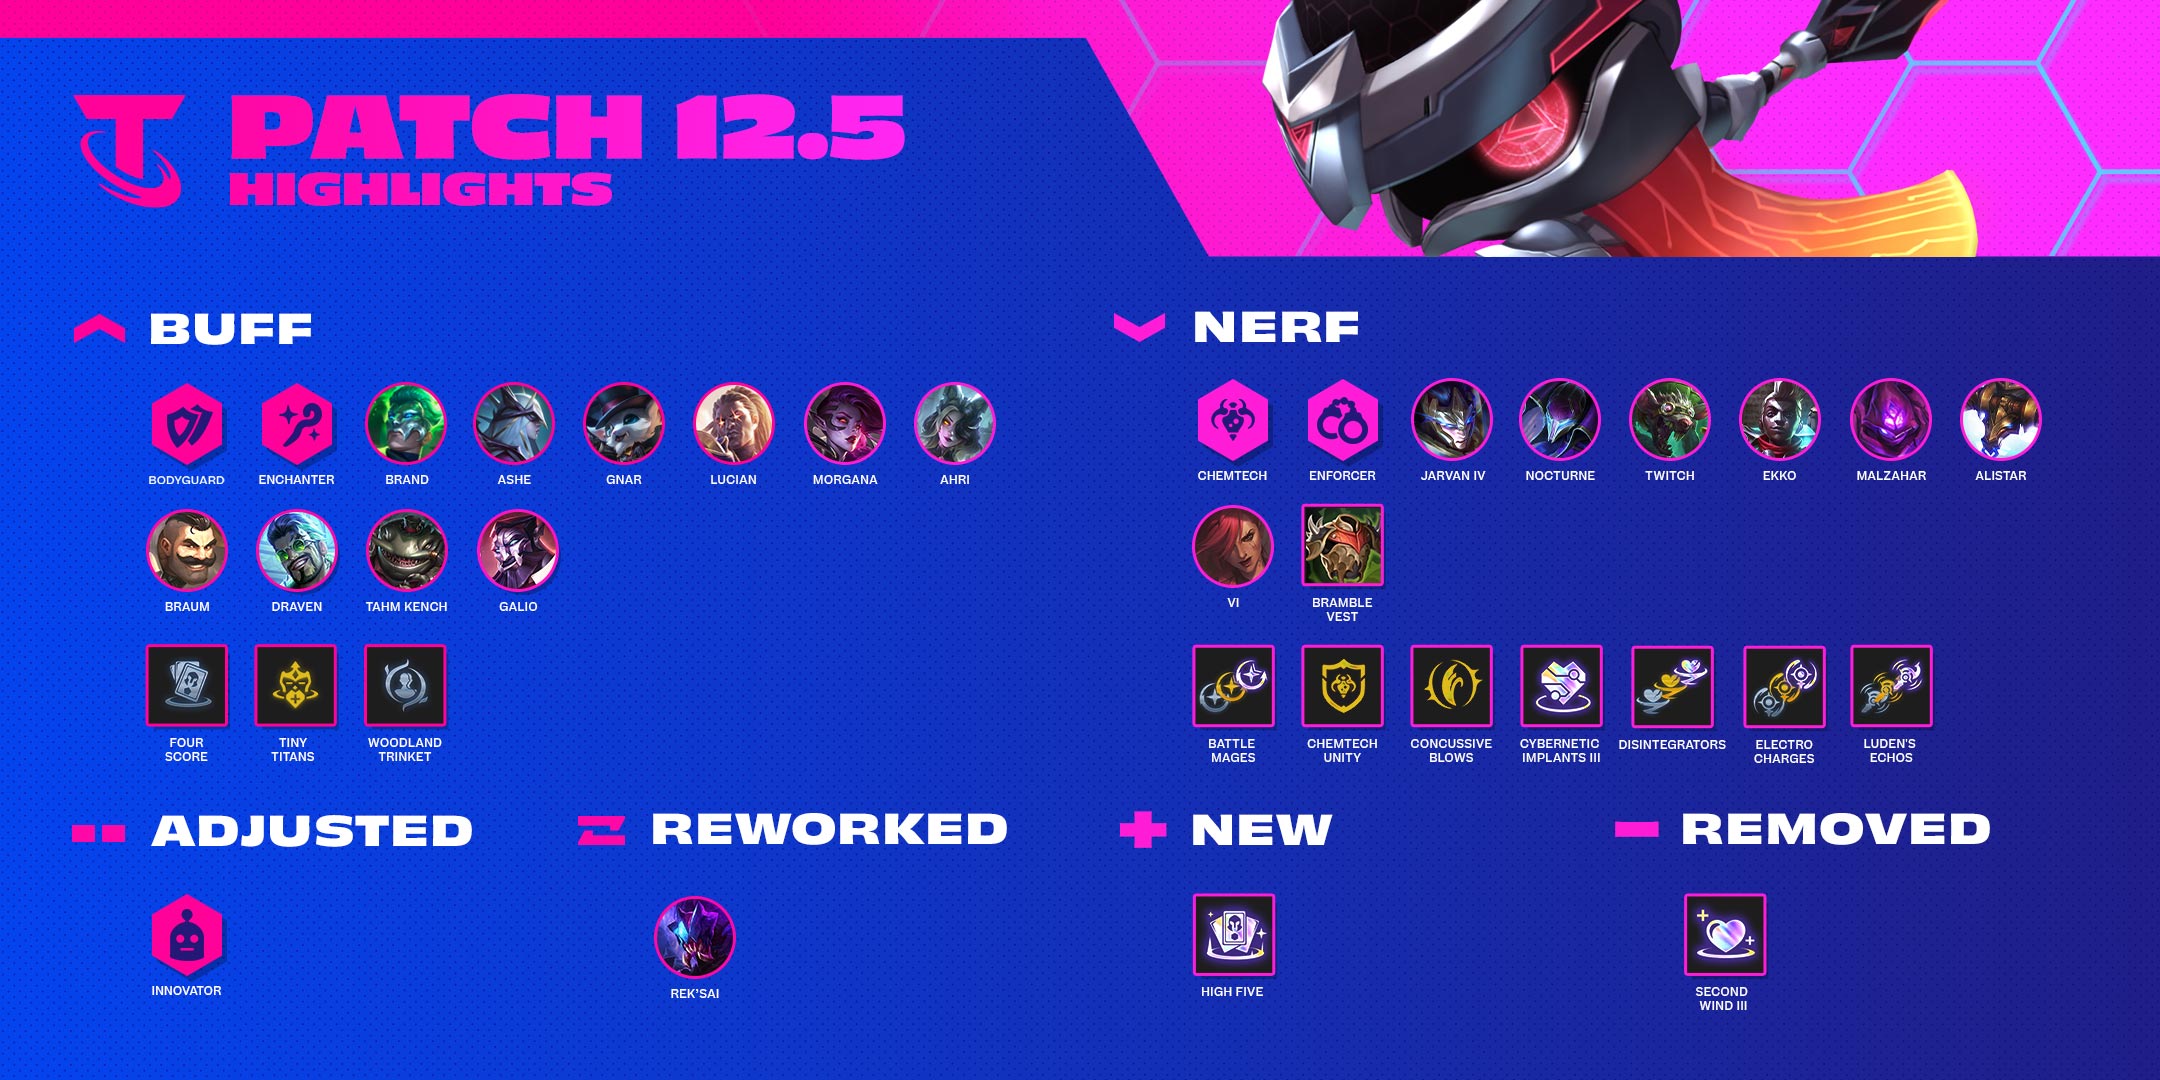 TFT Patch 12.5 Highlights